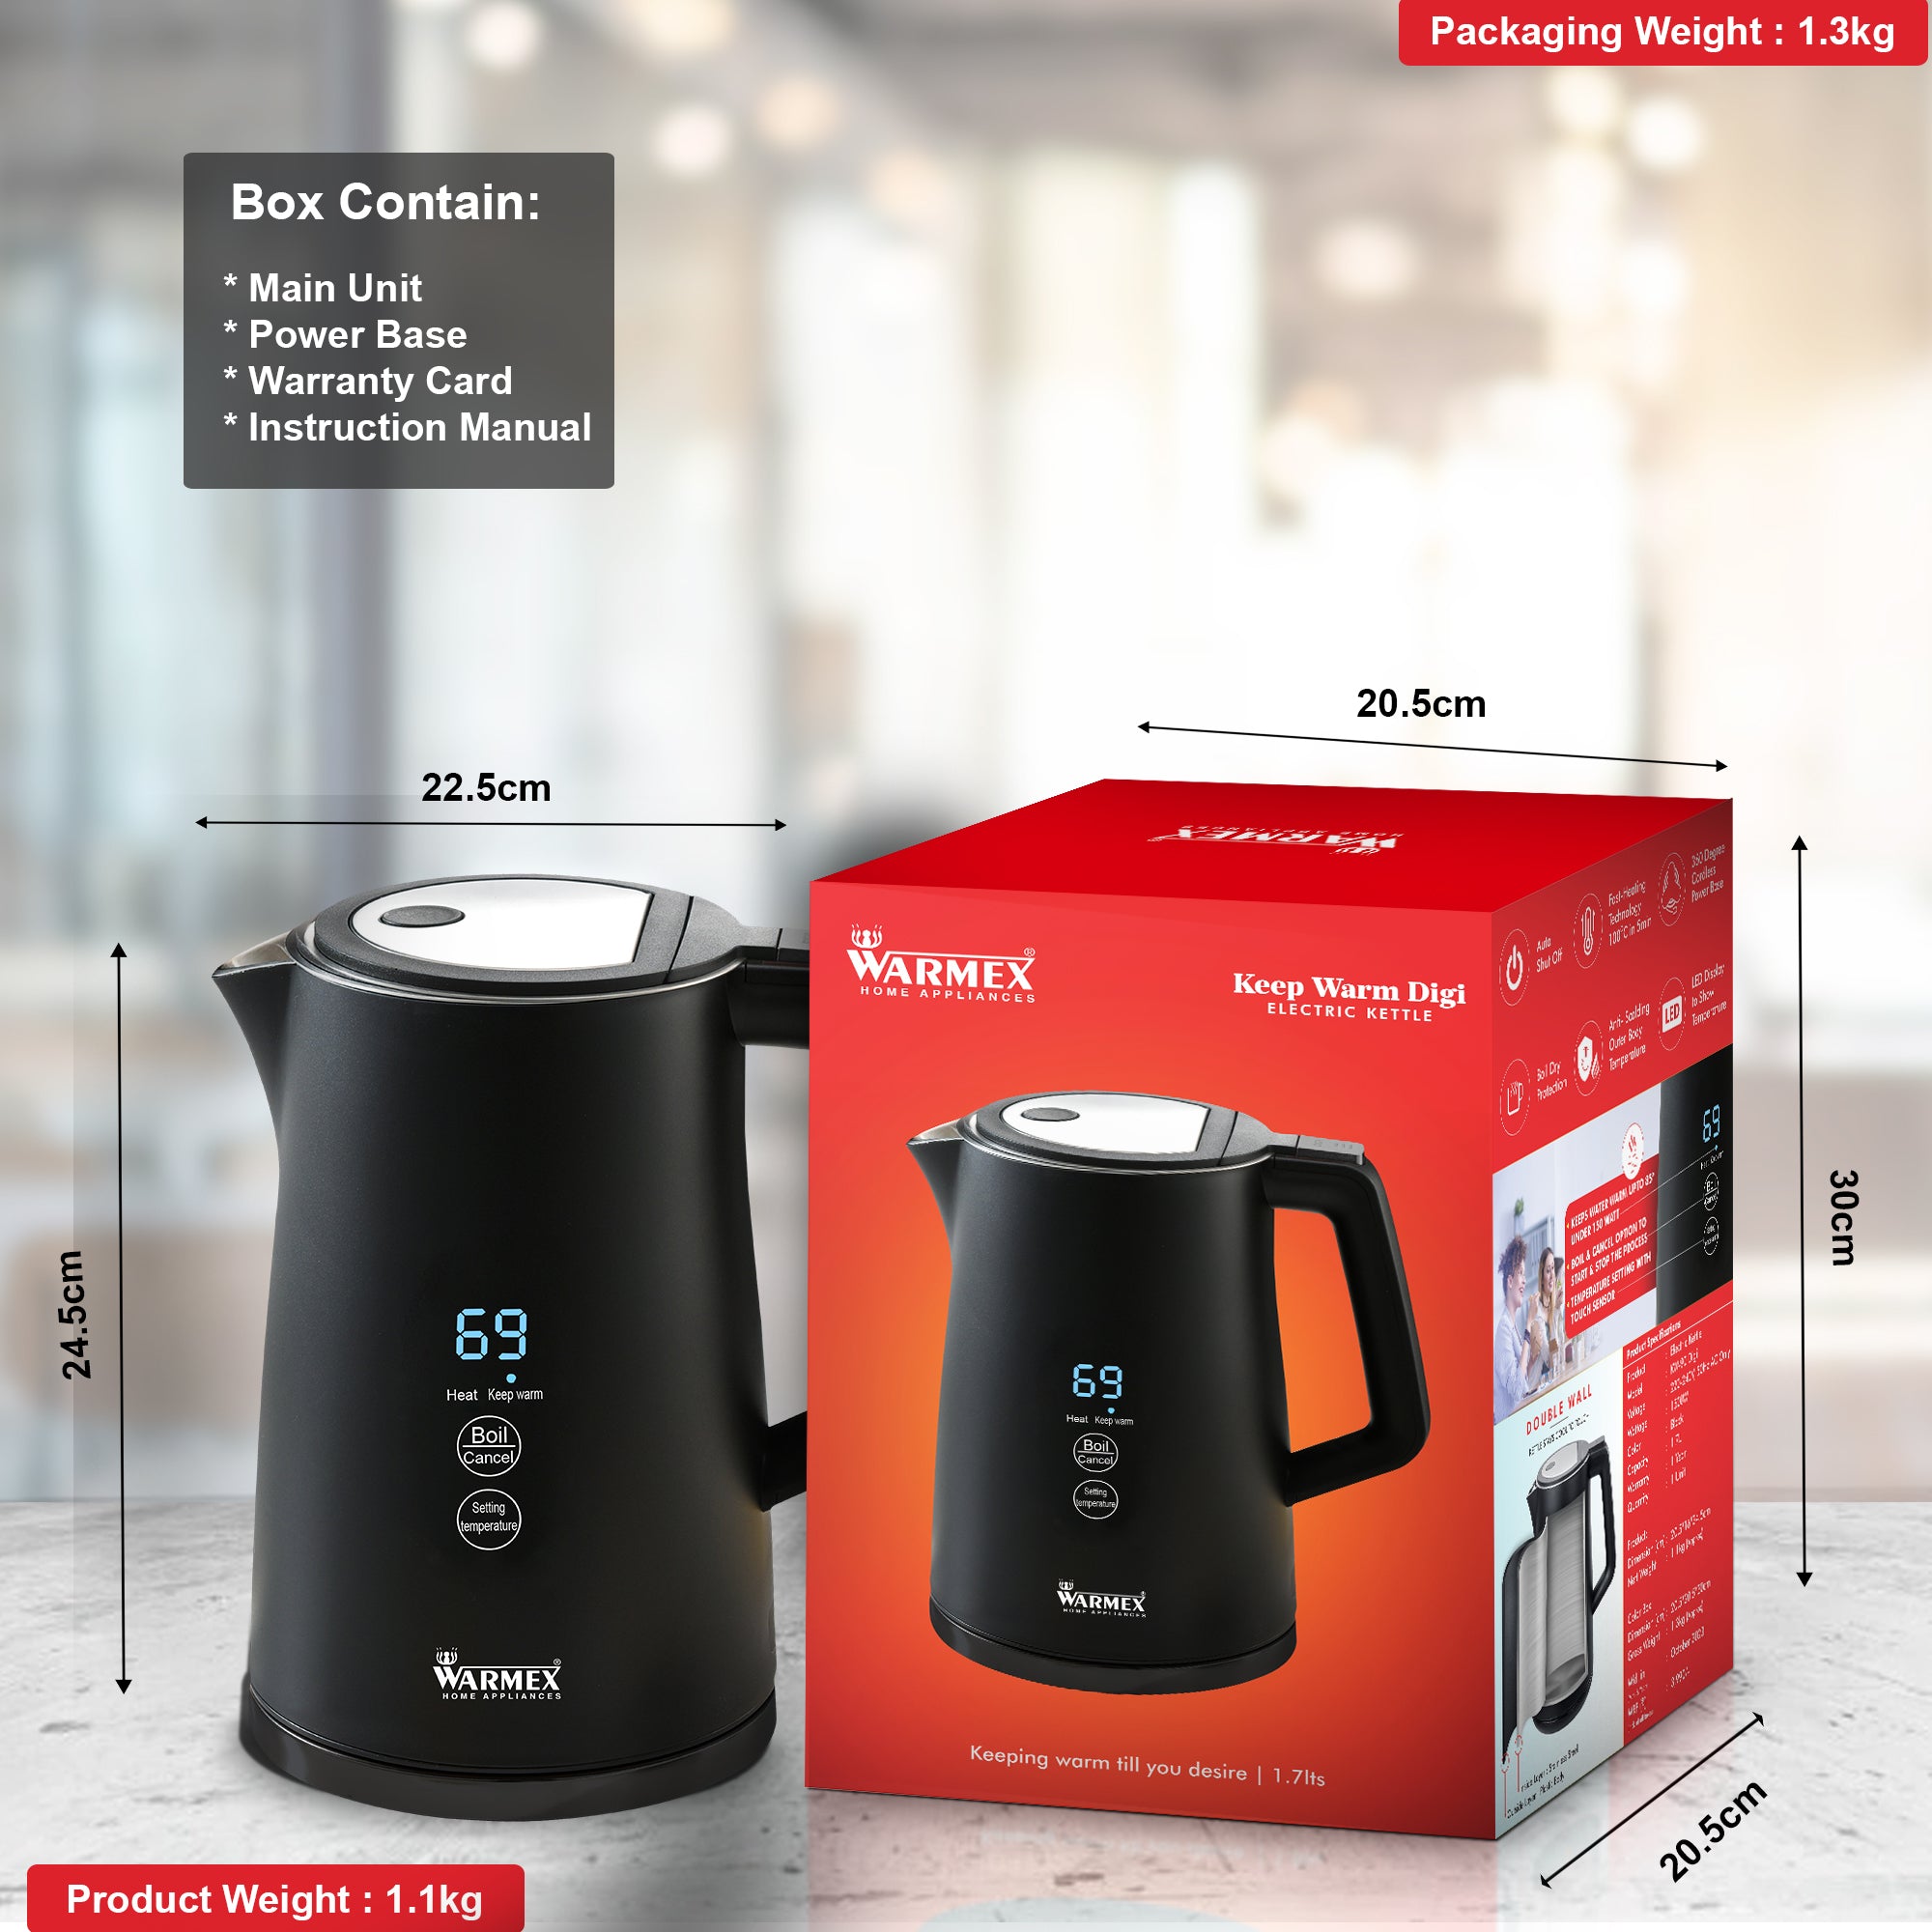 Warmex Premium Electric Kettle | 1.7 Ltr Double Wall | Cool touch feature | Touch Sensitive Panel | 1500 Watts | Digital Display | Auto shut-off (Black)